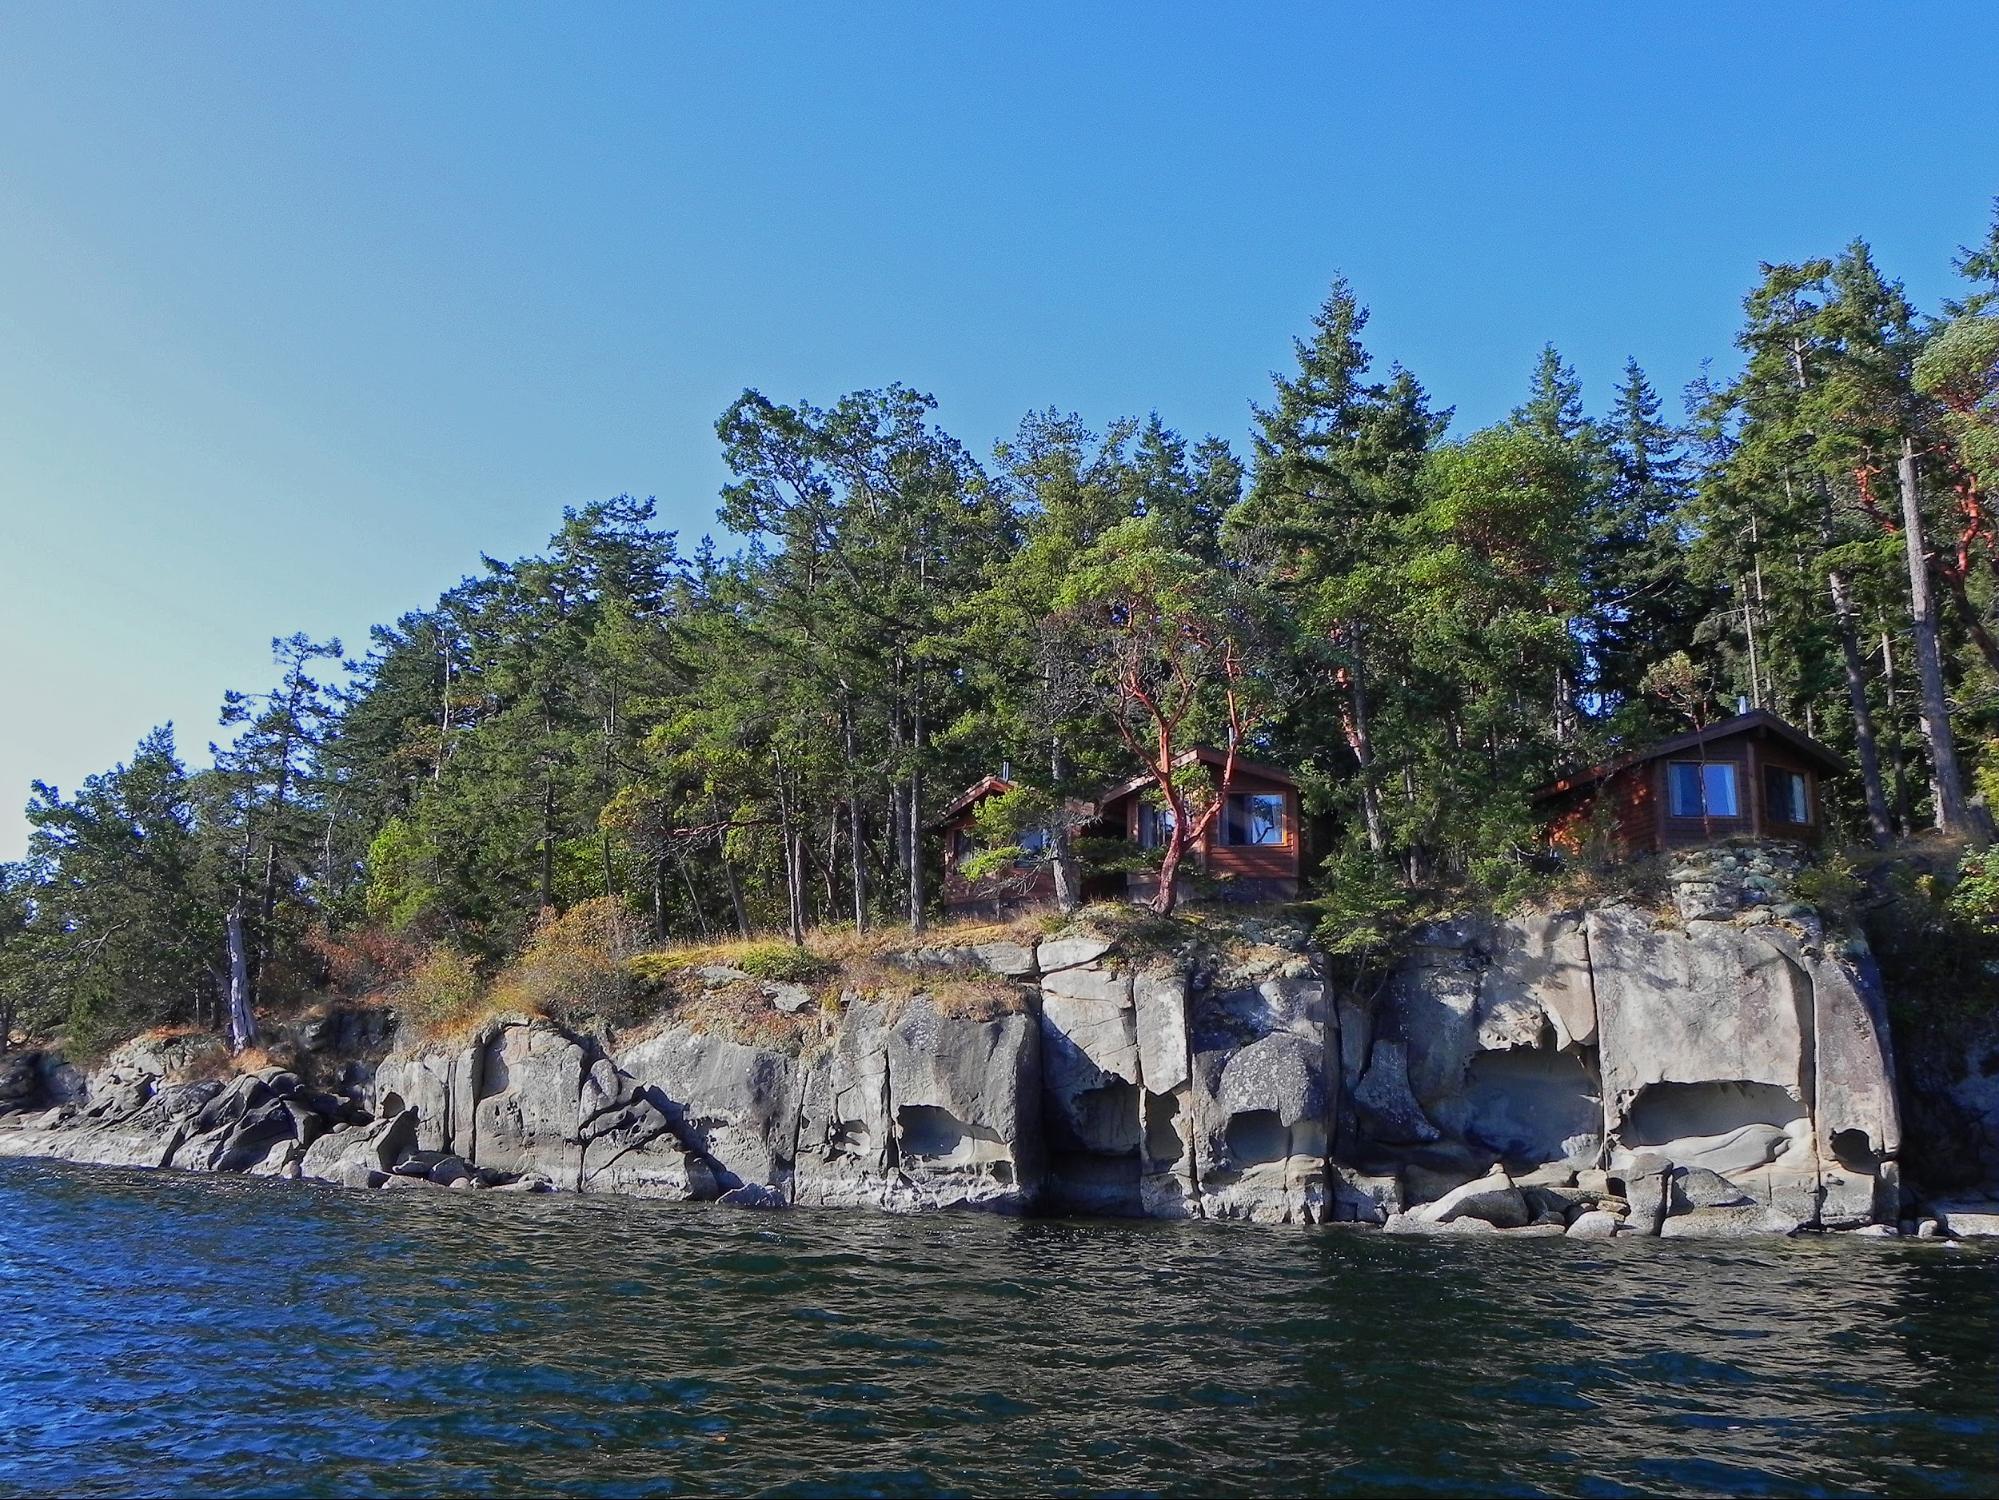 Cottage nestled in a rocky landscape overlooking the water.